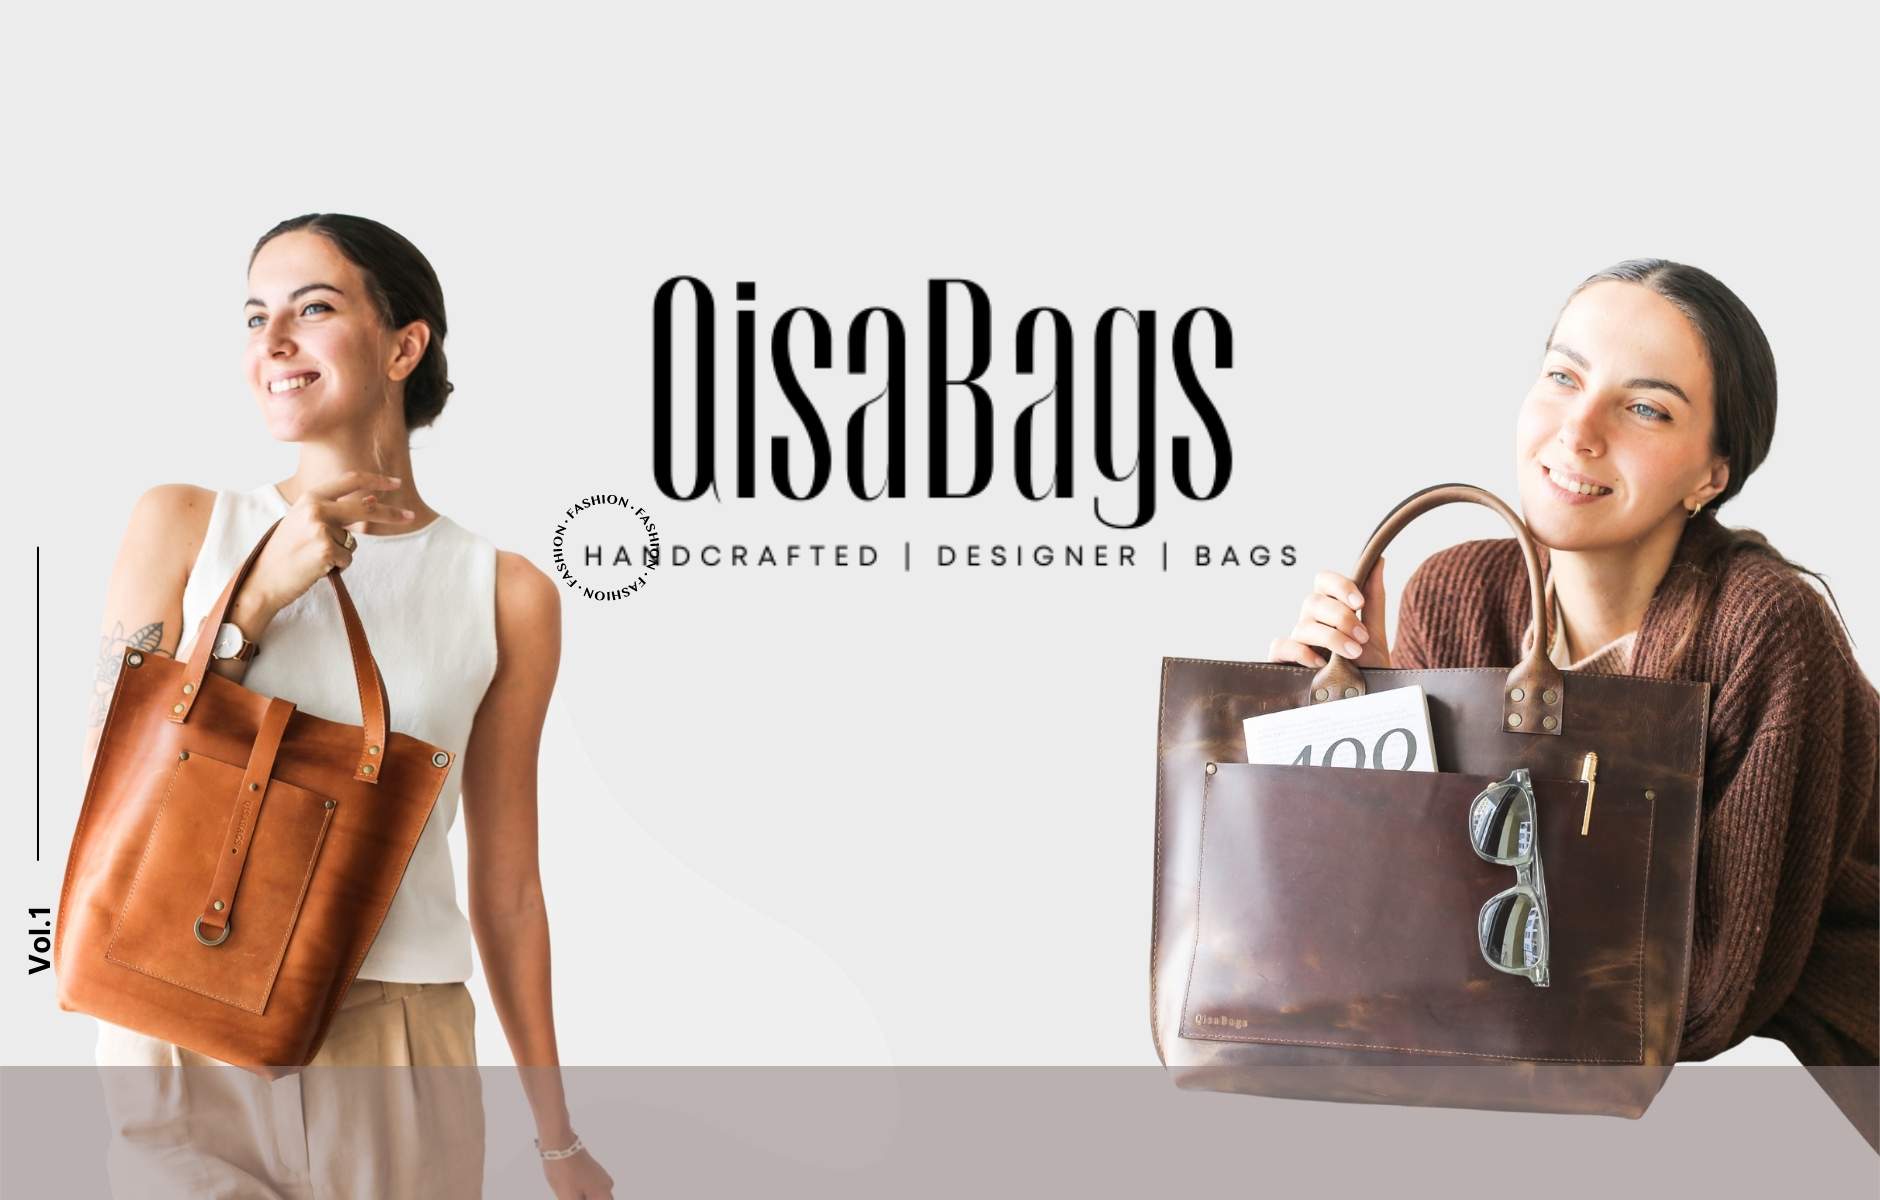 Women's Totes - Stylish Leather Totes